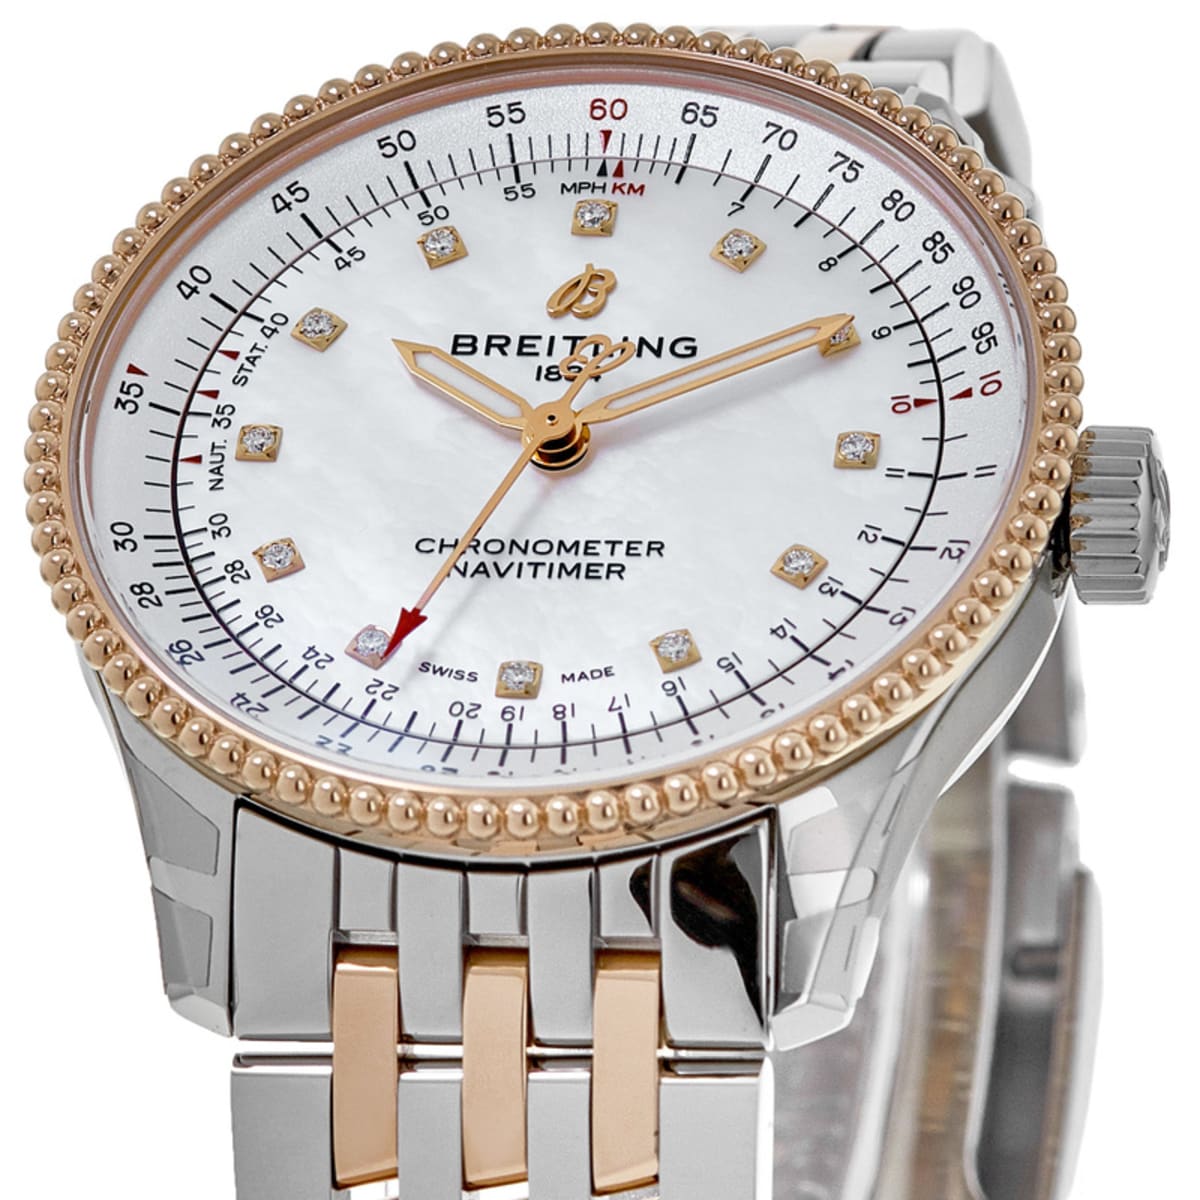 Breitling for - ICS Authentic - Đồng Hồ Thụy Sỹ, Nhật, Mỹ